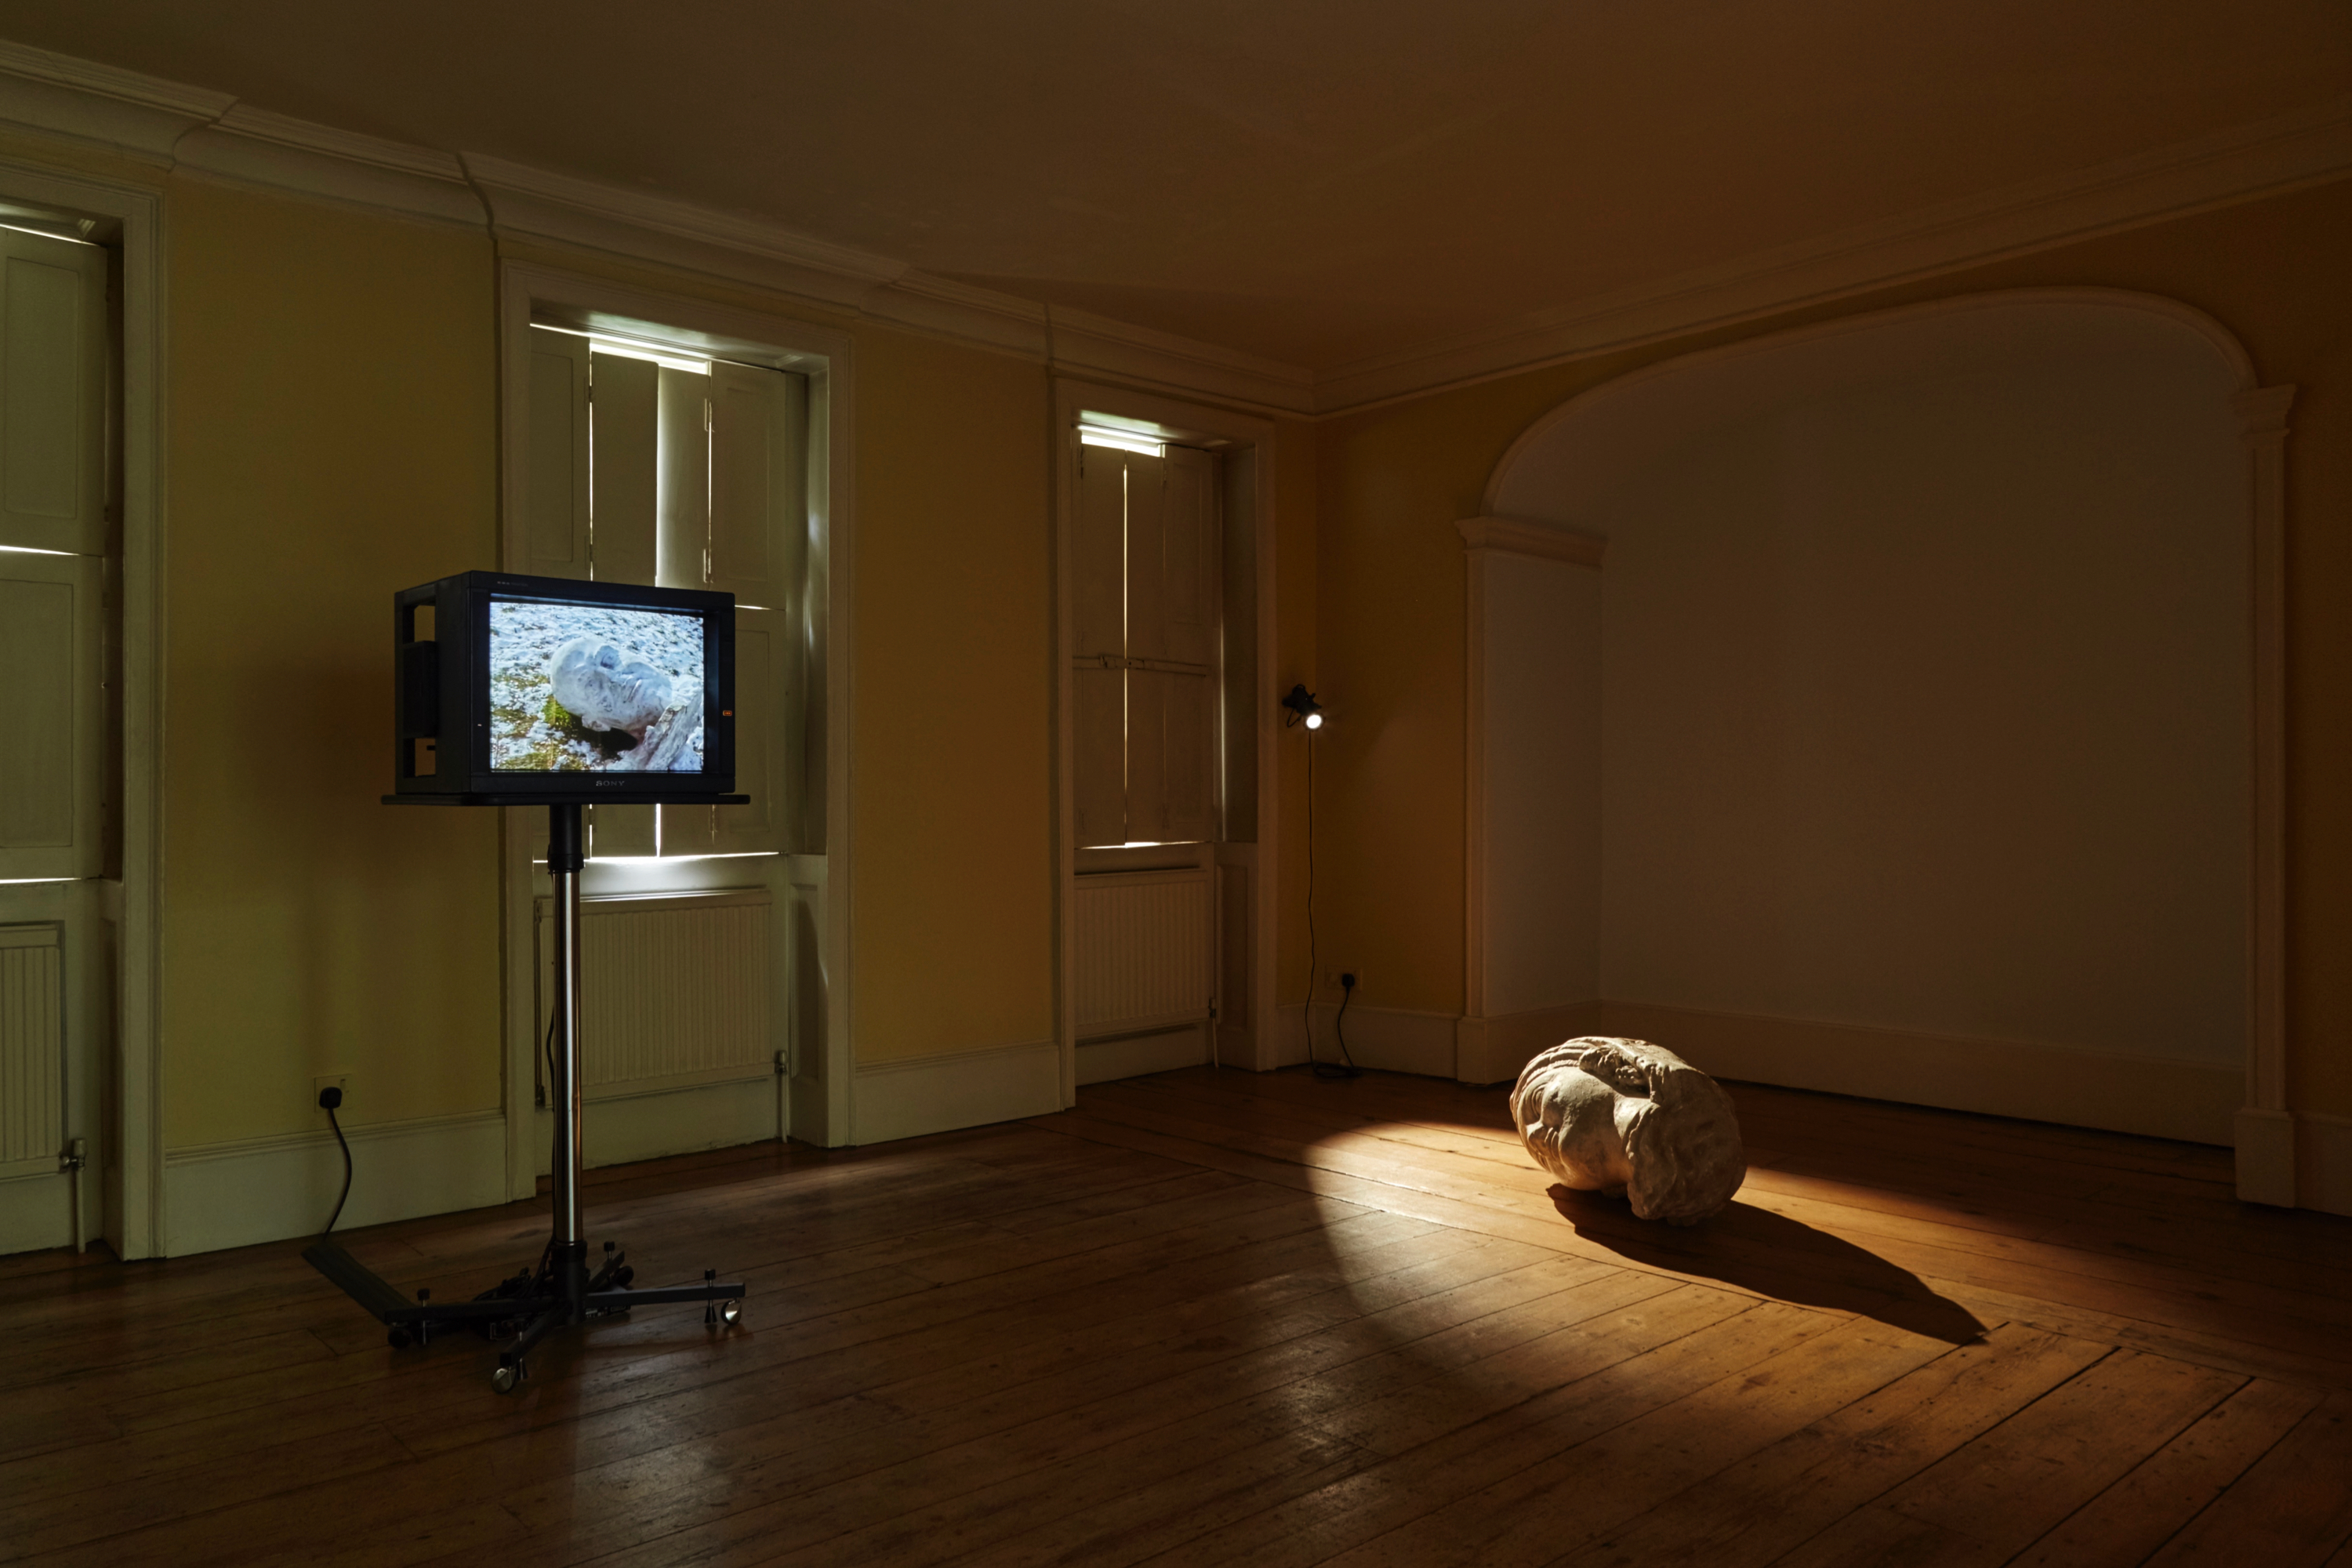 Installation view: ‘Object of Doubt’, curated by Kirsty White, Danielle Arnaud, 19 October-9 November 2019